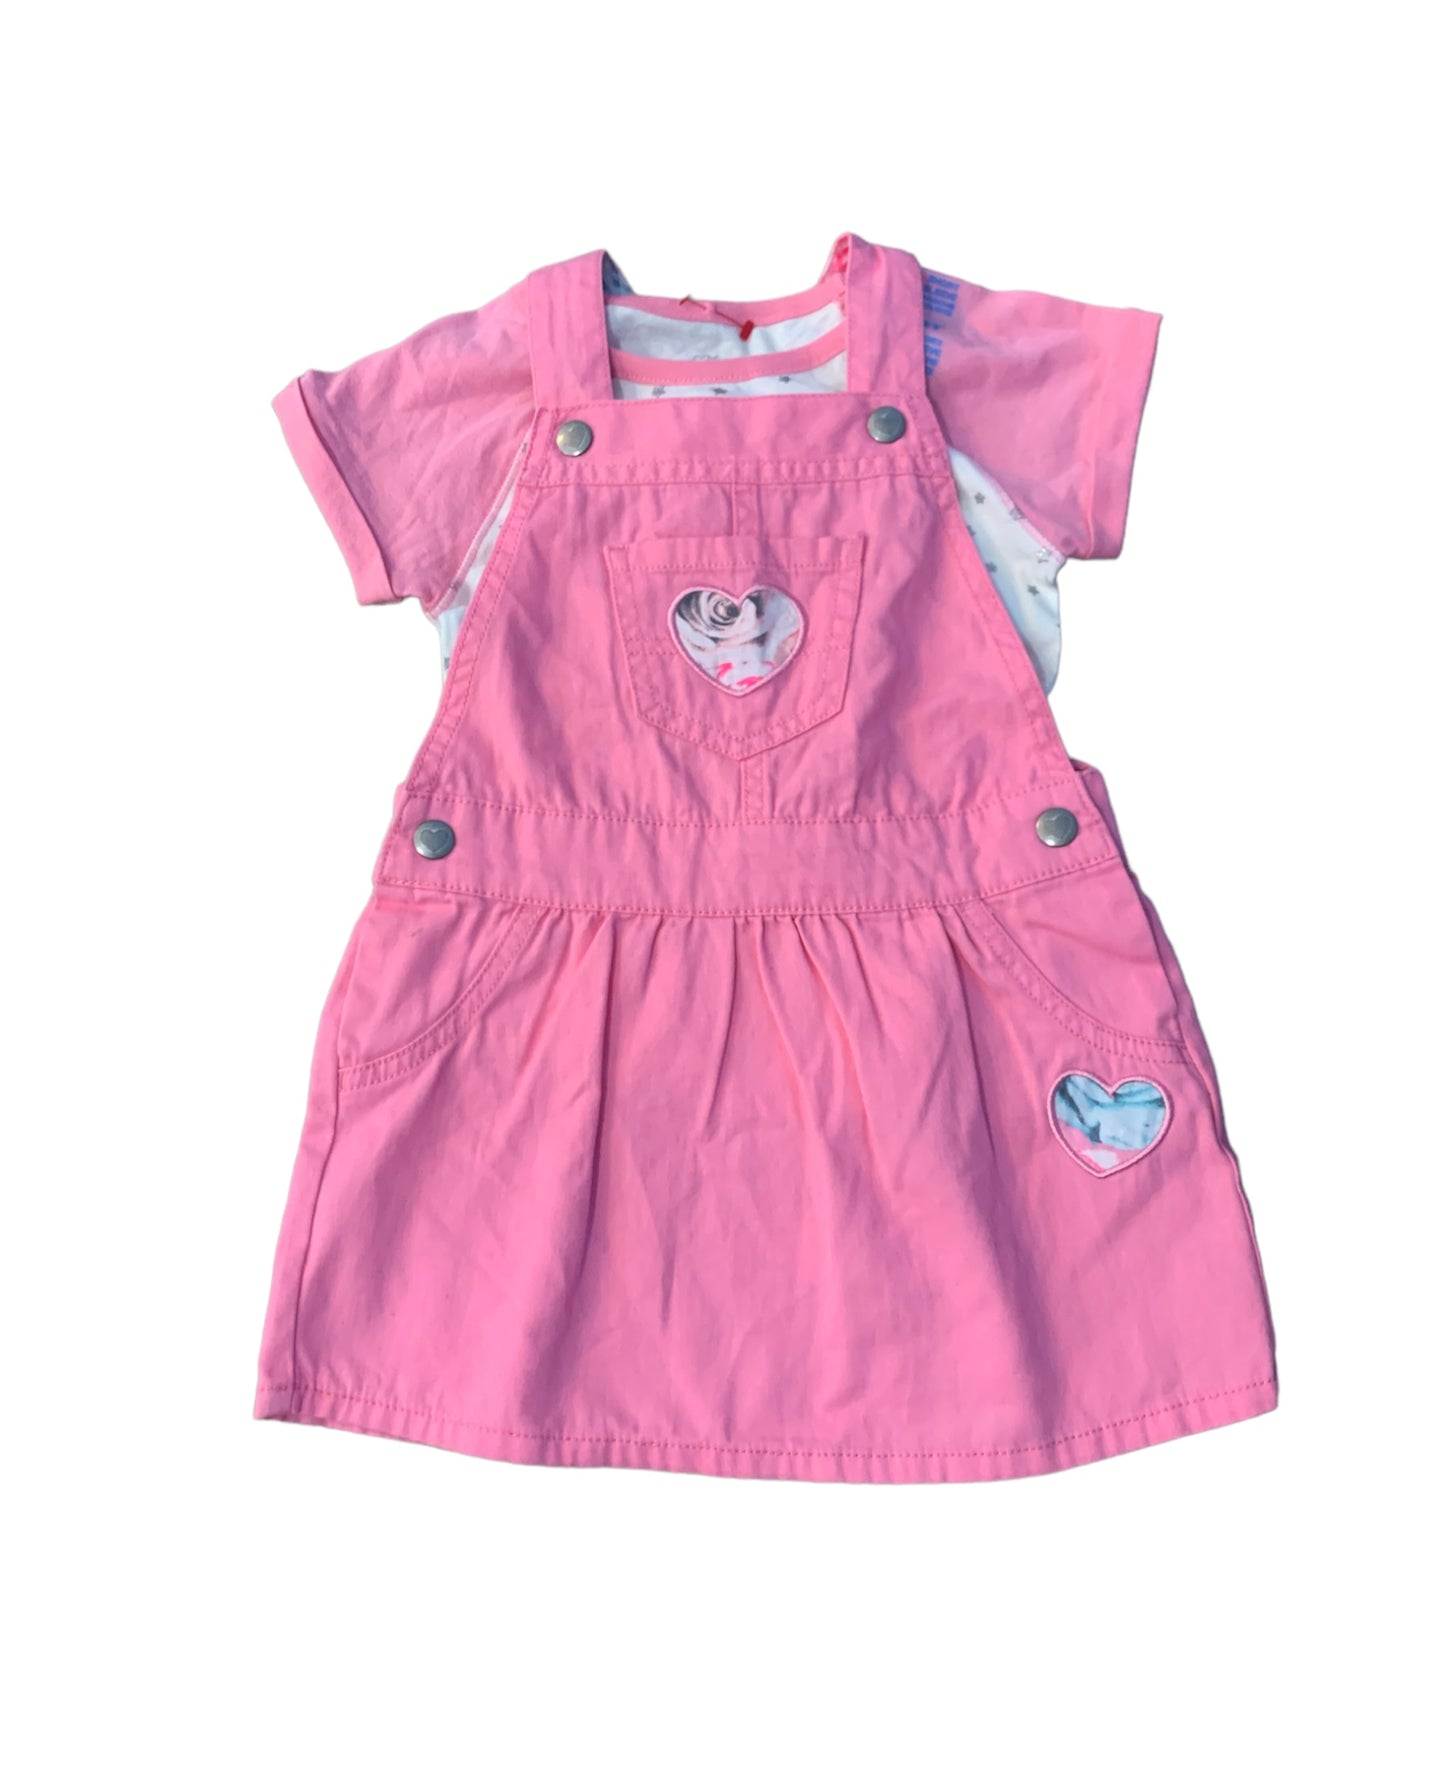 Pink Stars 2pc Outfit Size 2T